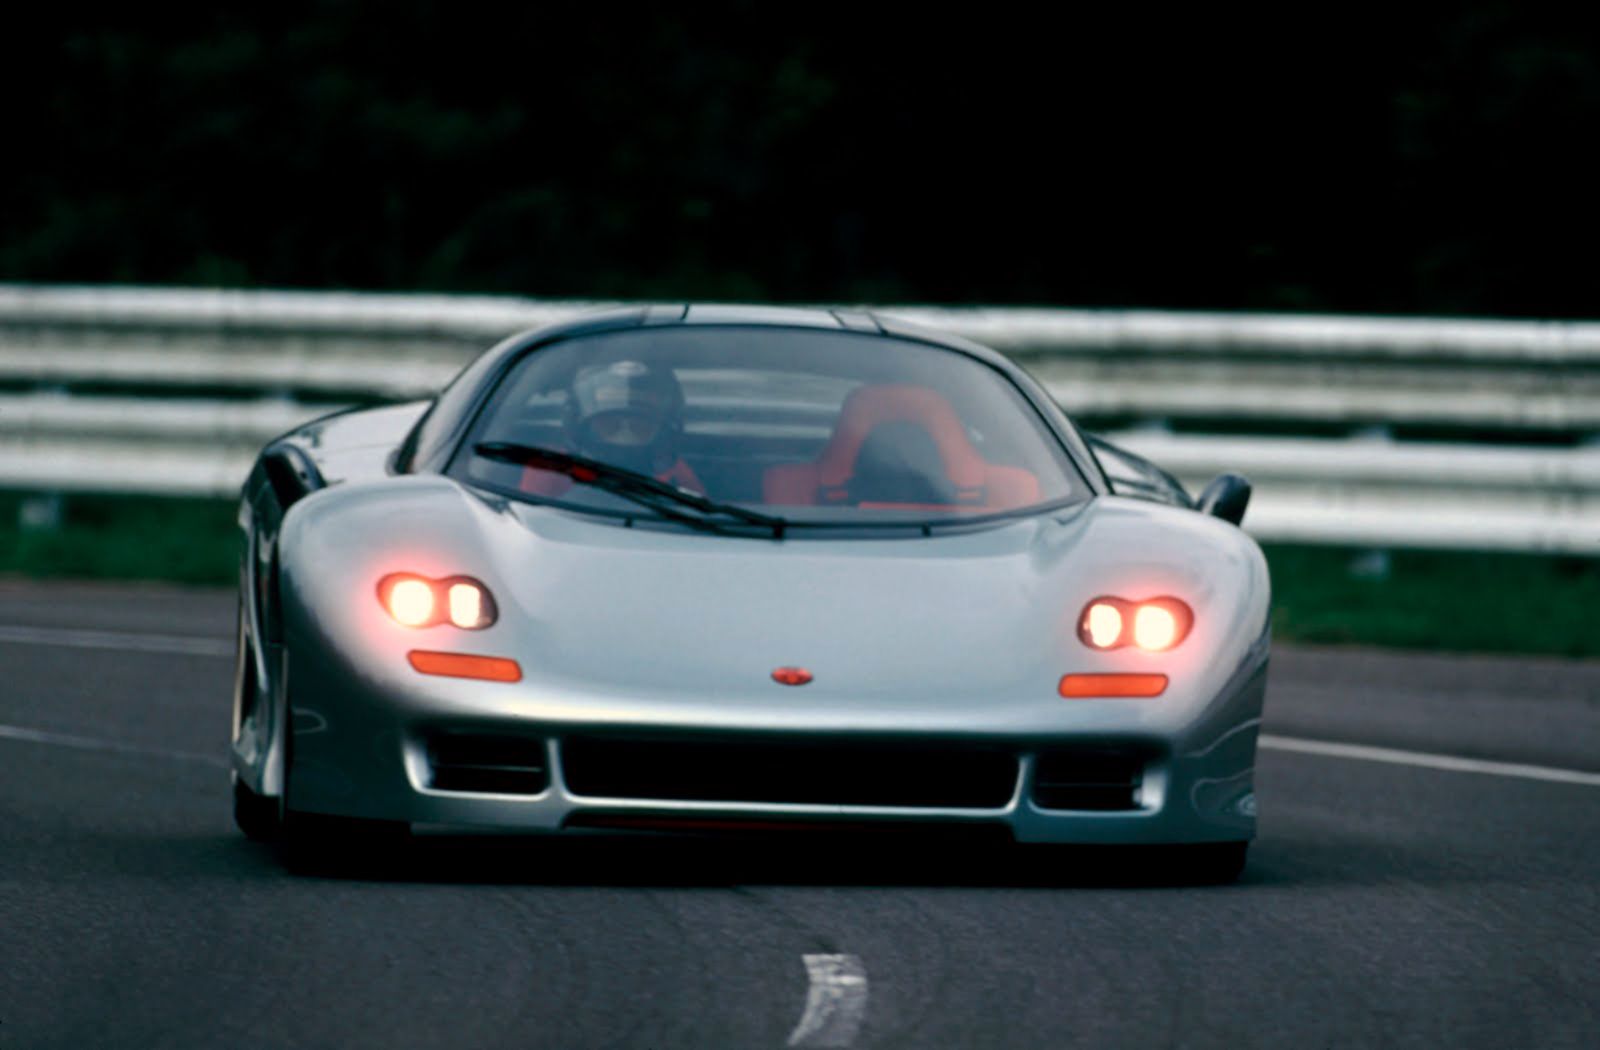 The Most Expensive Cars in the World (That You Could Theoretically